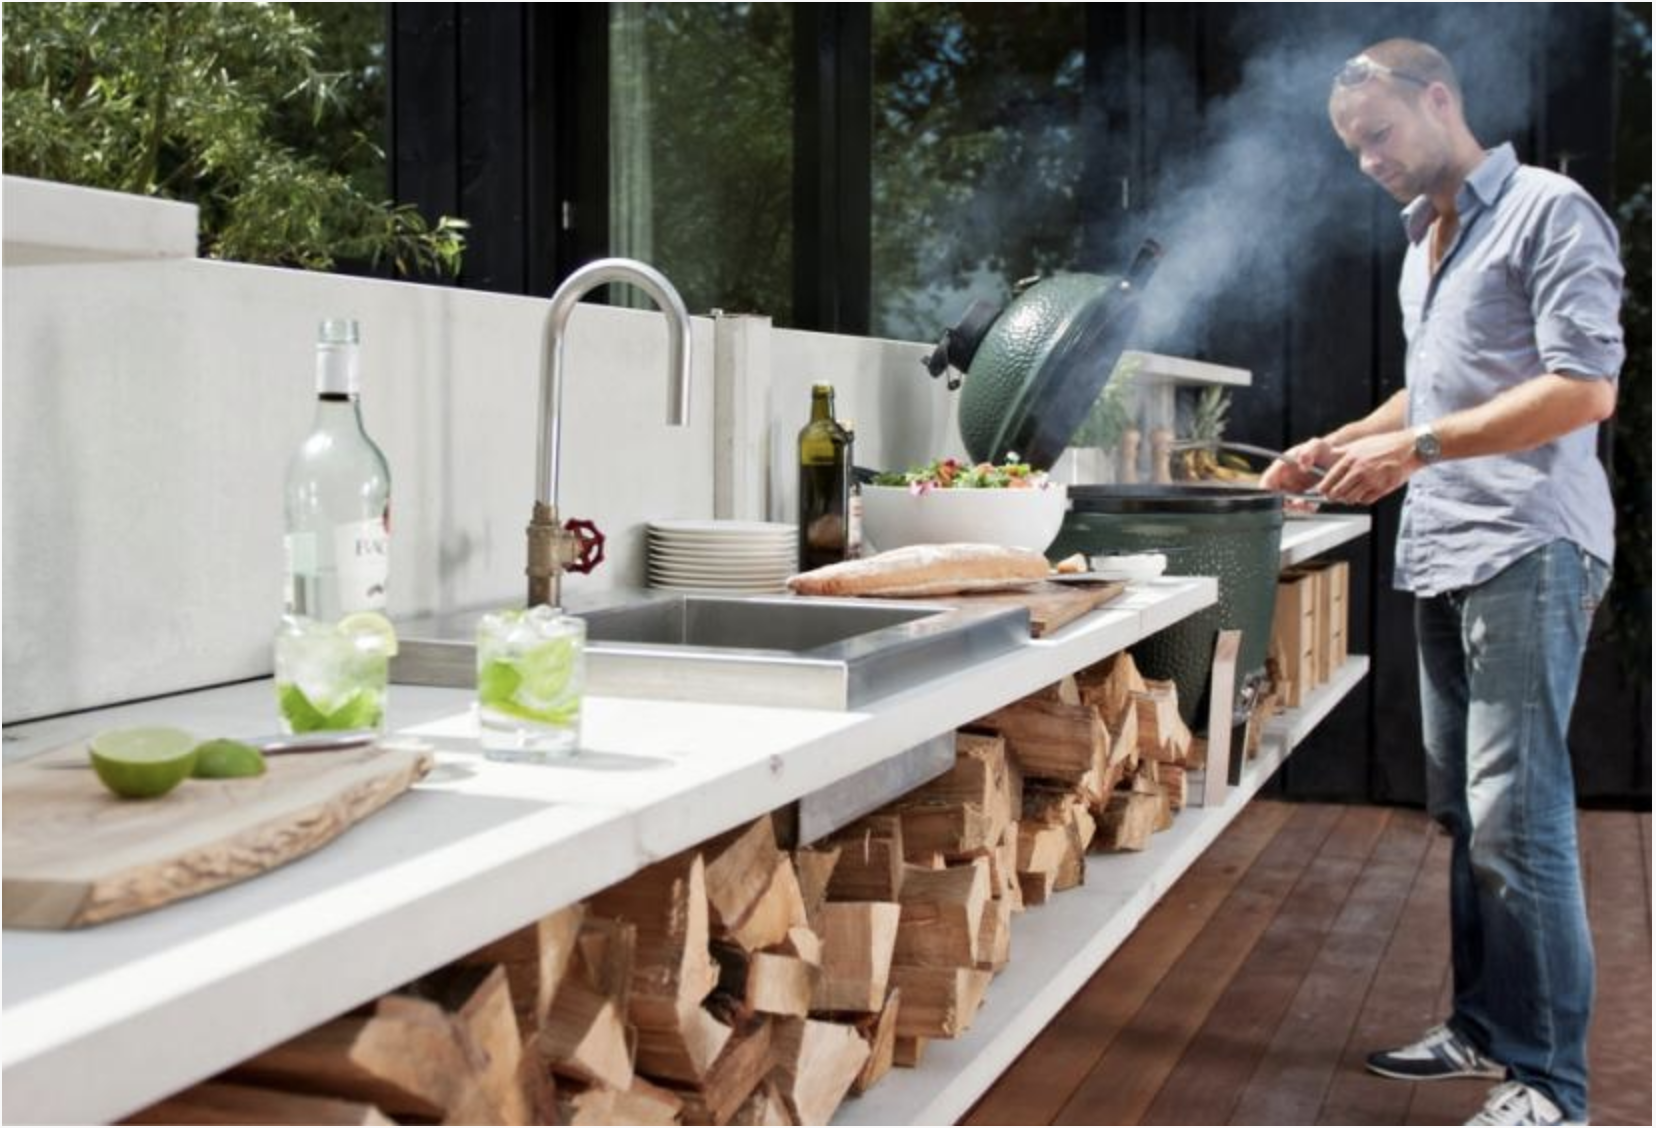 Best Grill Gifts For Outdoor Kitchens Jana Donohoe Designs